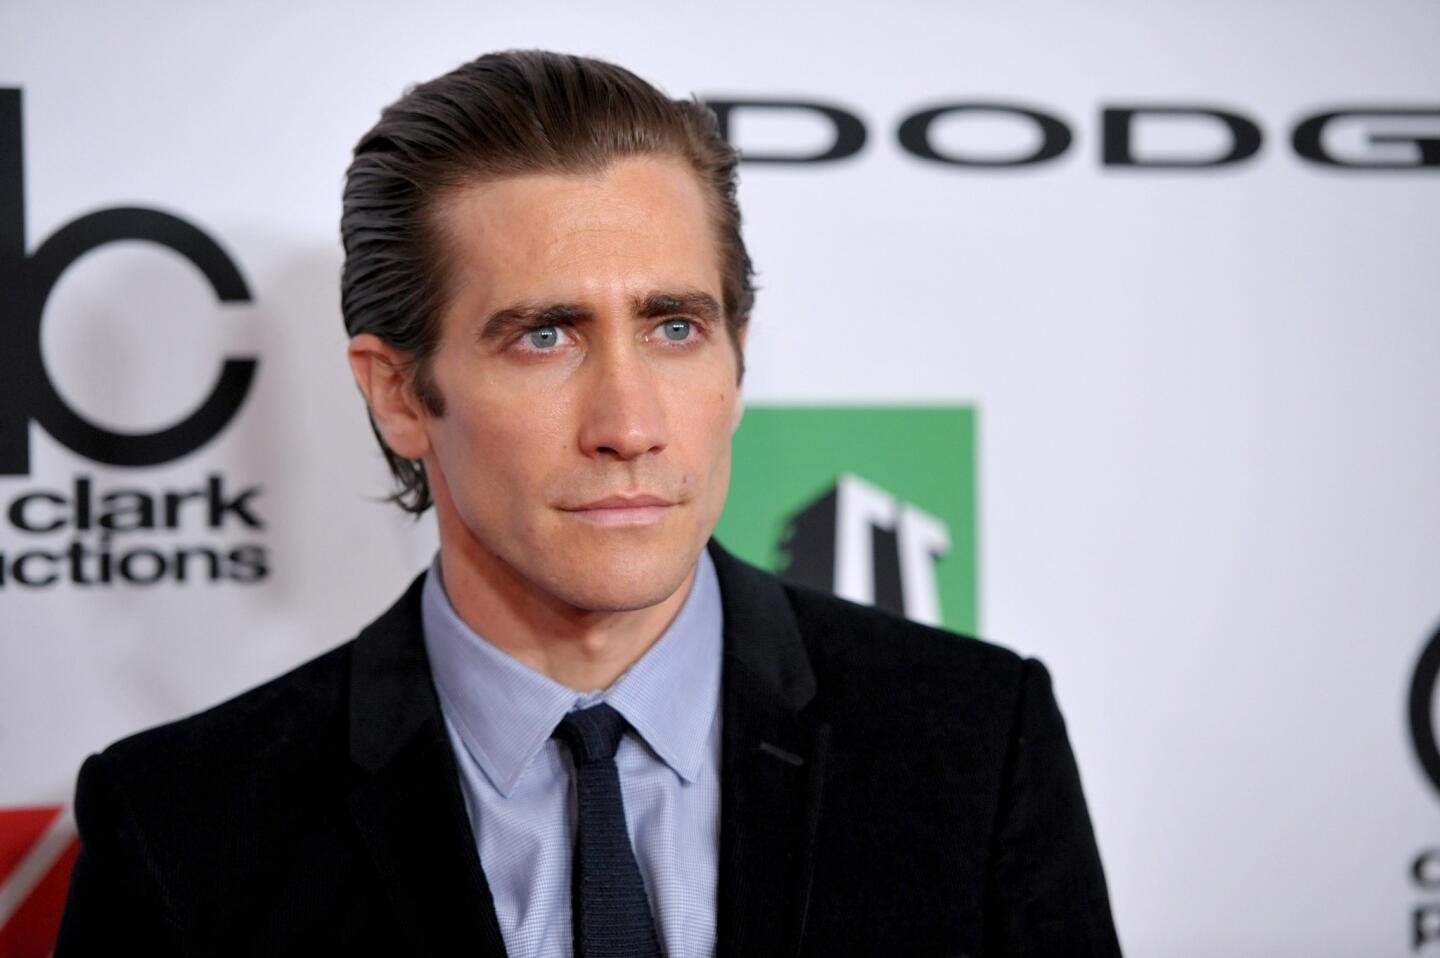 Jake Gyllenhaal sent to ER after punching mirror on set, cutting hands